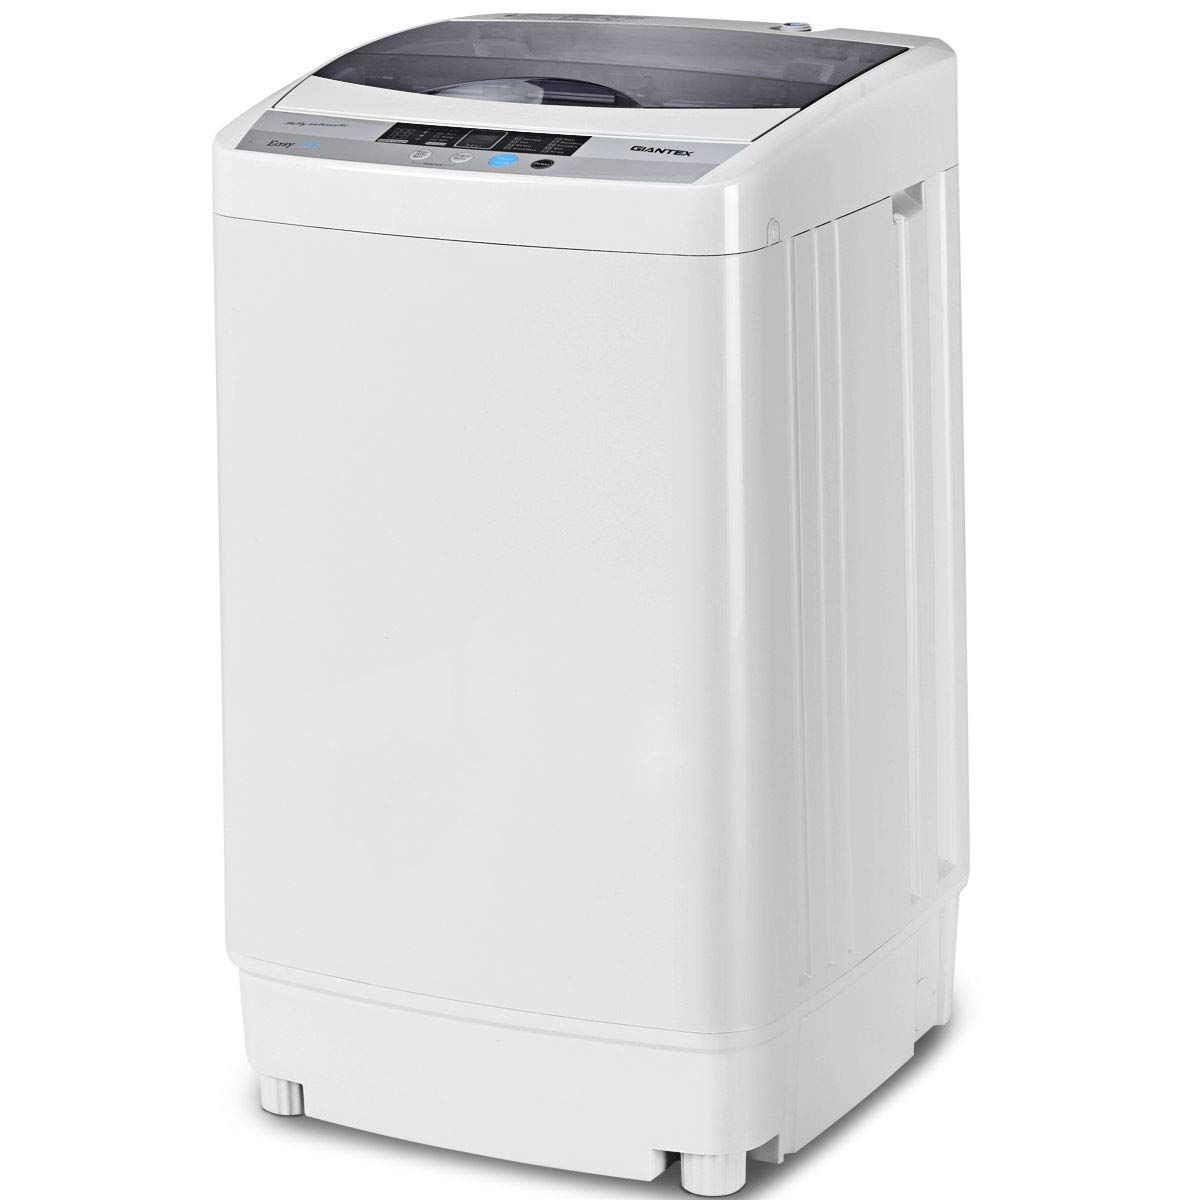 10 Best Top Loading Washing Machines of 2021 — ReviewThis